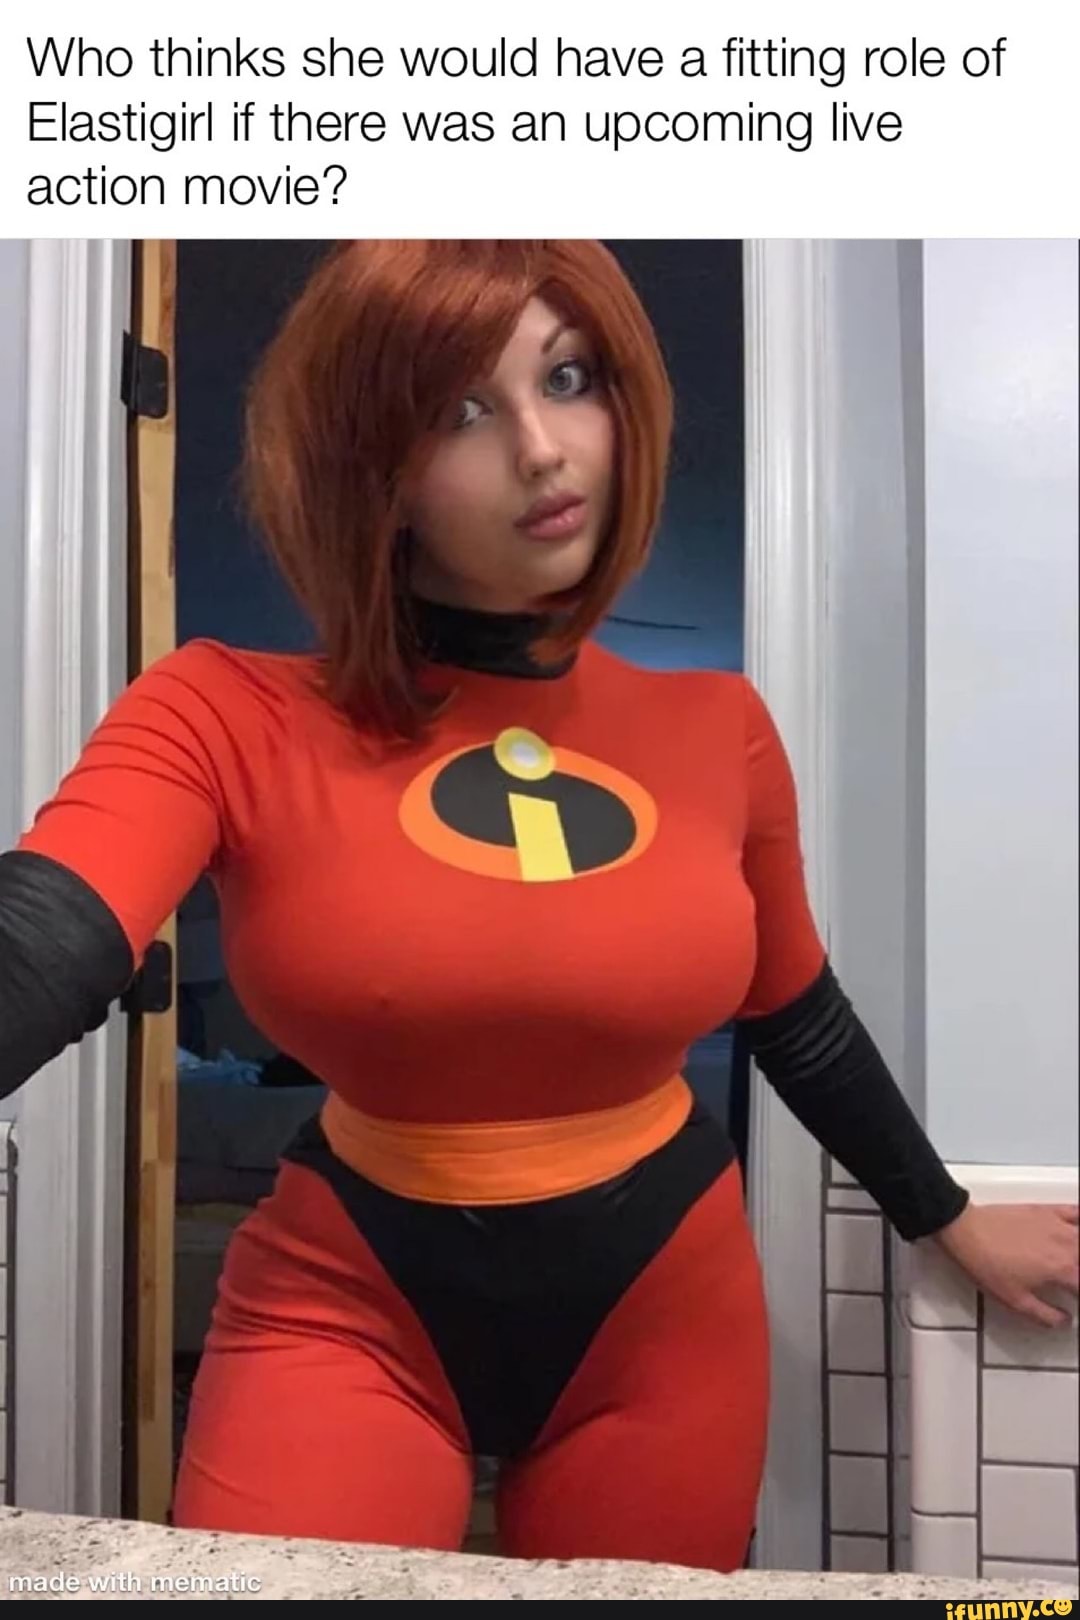 Who thinks she would have a fitting role of Elastigirl if there was an upco...